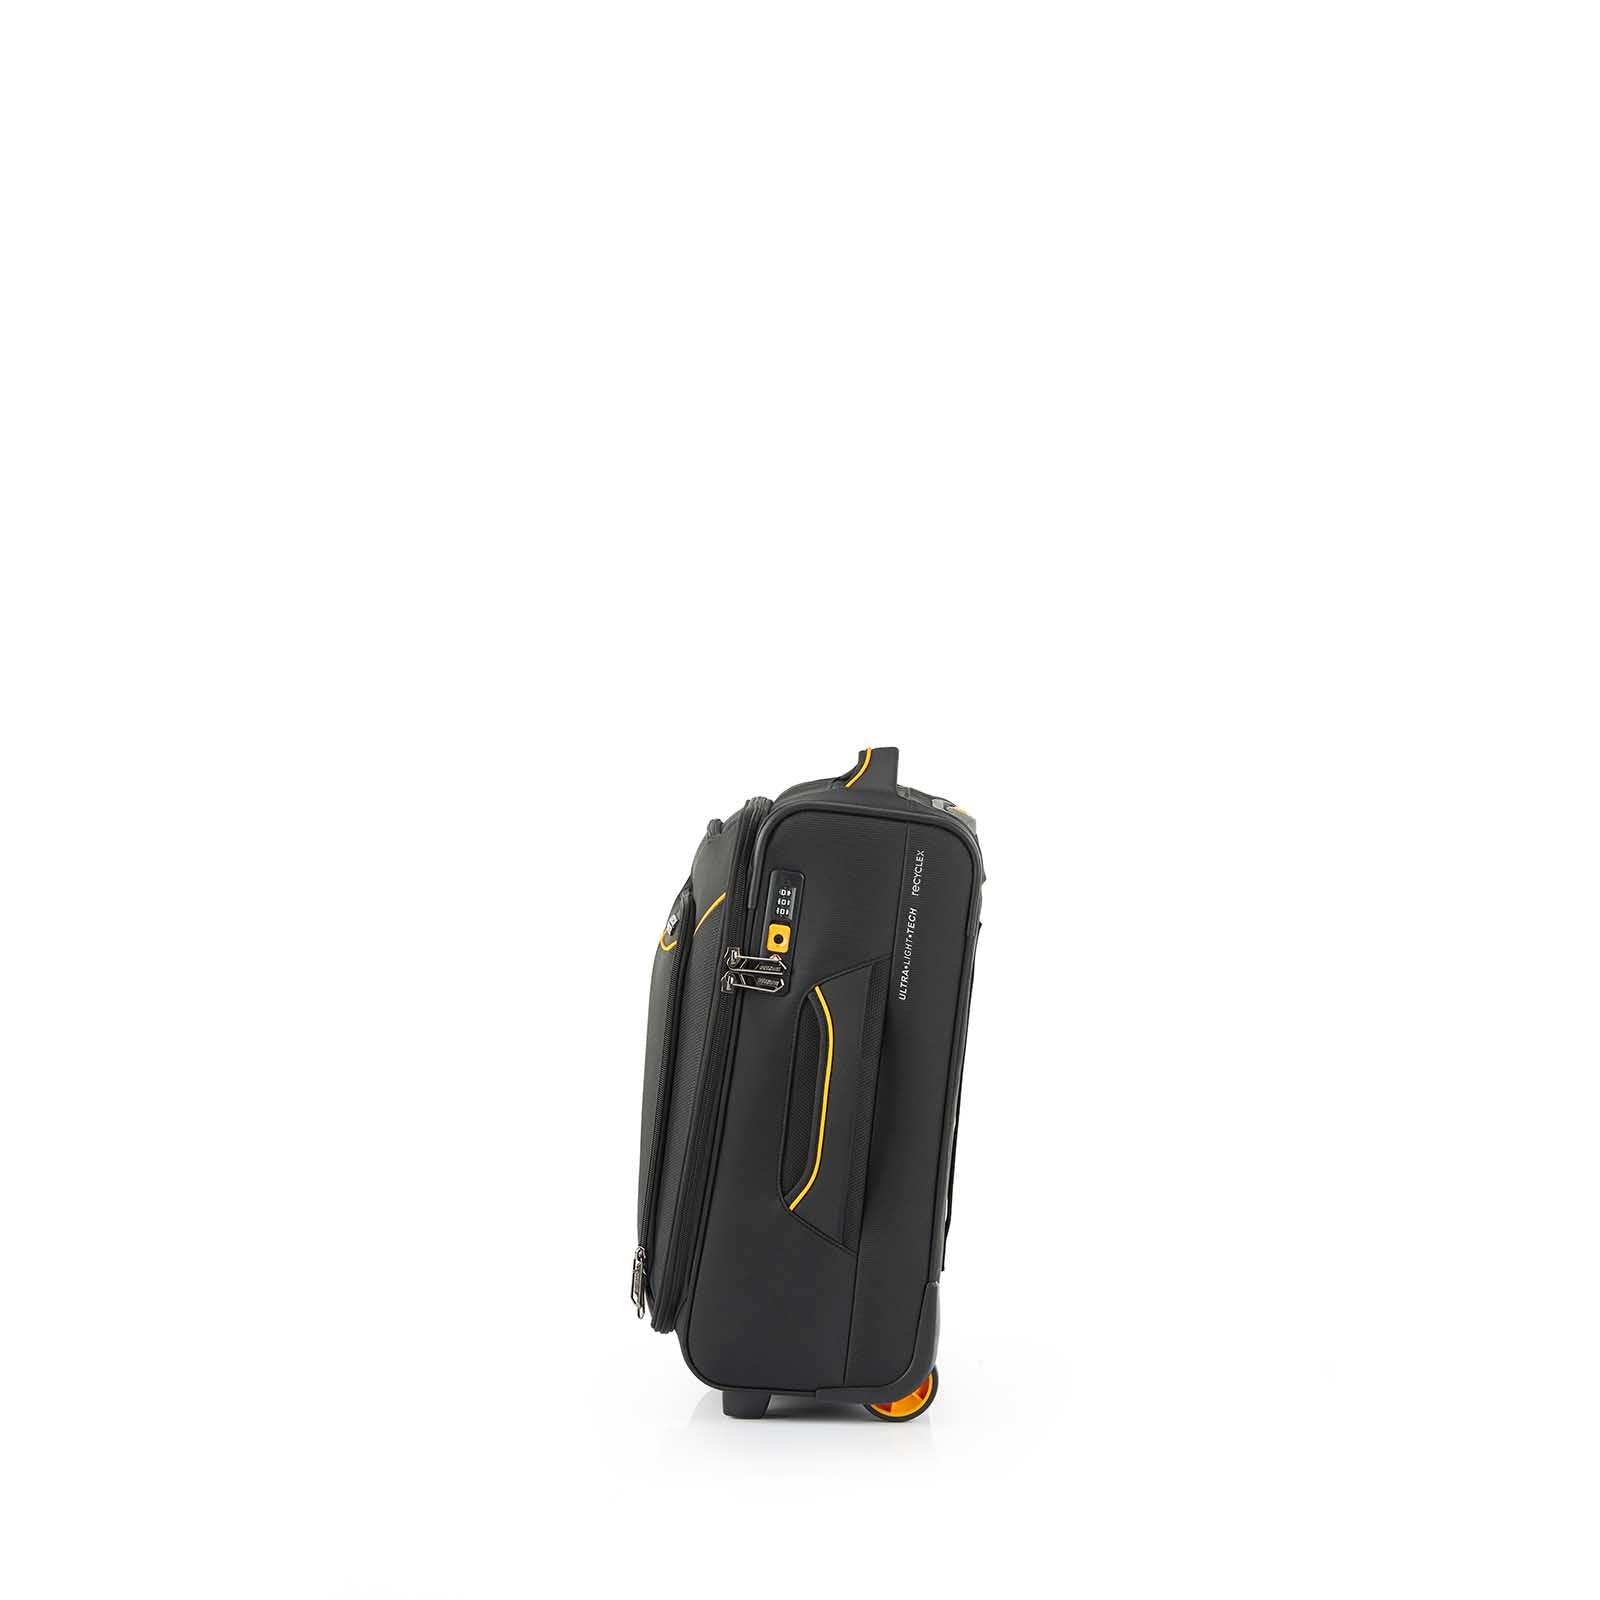 American-Tourister-Applite-4-Eco-50cm-Carry-On-Suitcase-Black-Mustard-Side-Handle